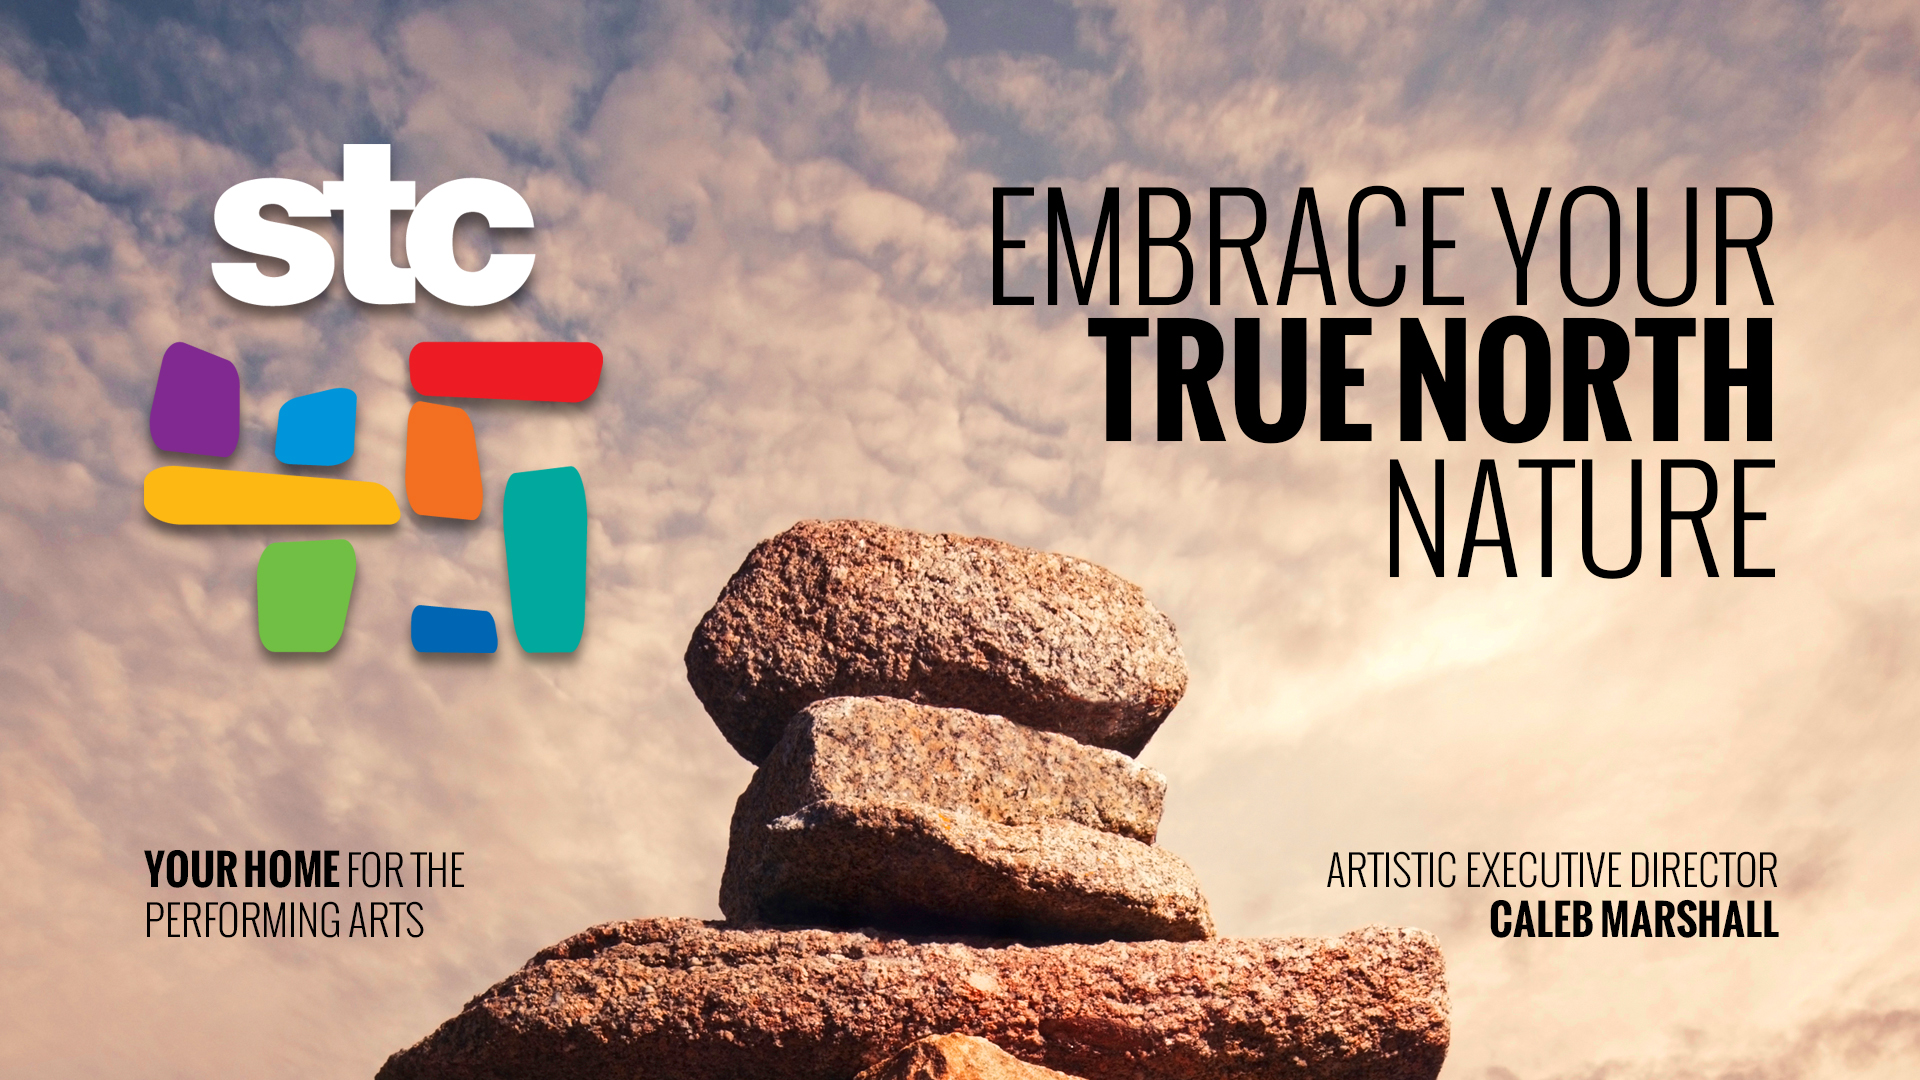 DISCOVER THE TRUE NORTH WITH STC IN THEIR 45TH ANNIVERSARY SEASON!